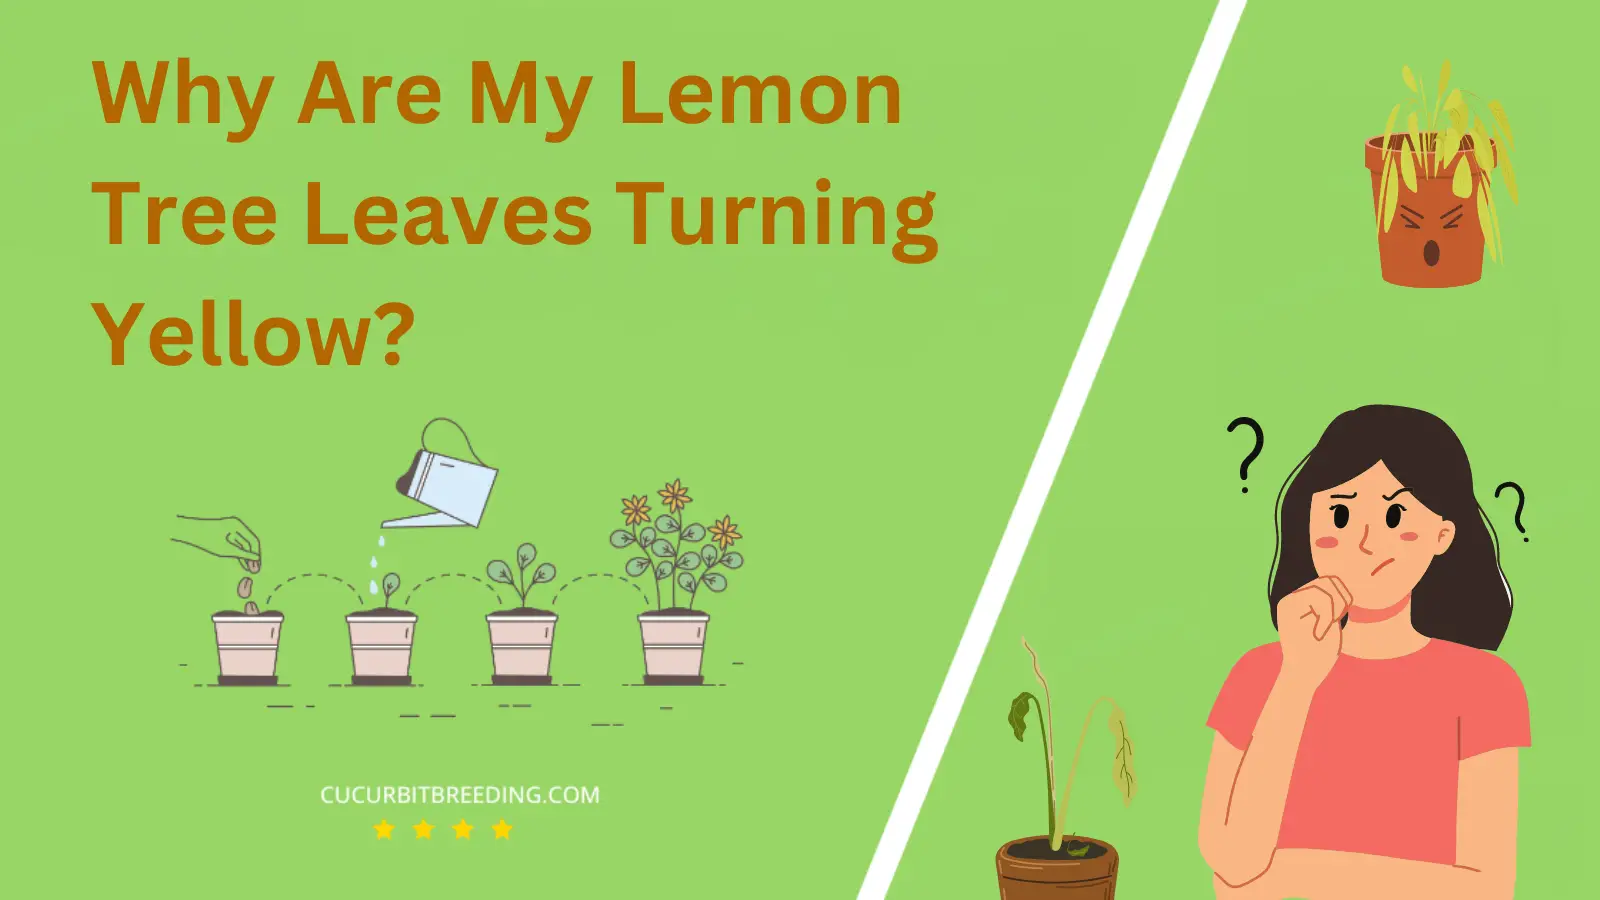 Why Are My Lemon Tree Leaves Turning Yellow